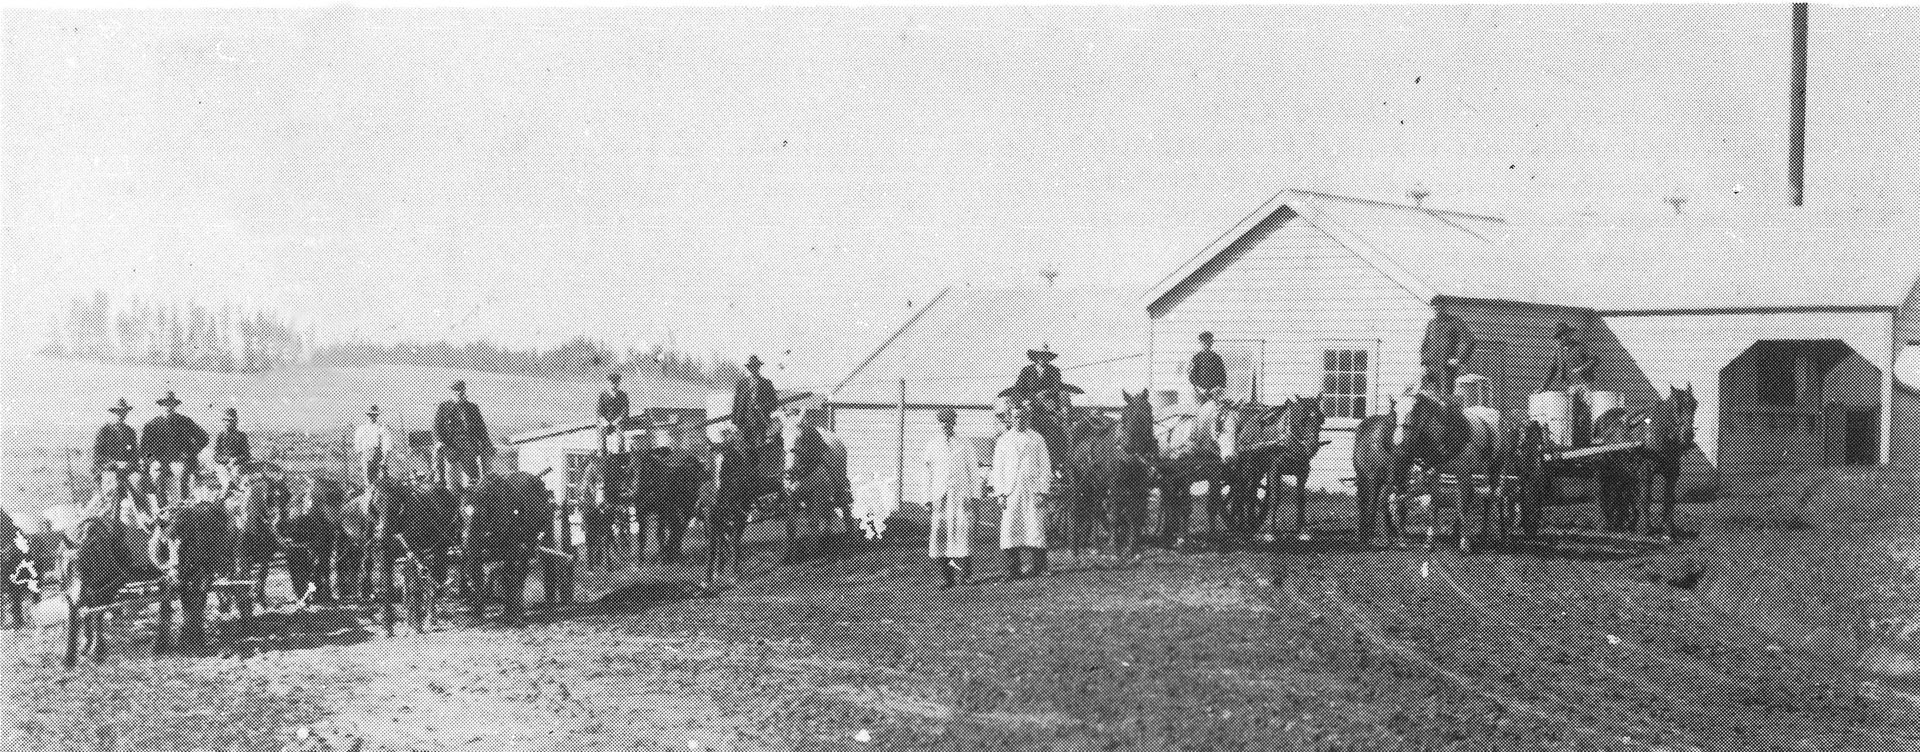 Mr Jackways and his First Assistant, Mr Campbell, outside the original Eureka Dairy Company's factory with some of the early suppliers in 1904.